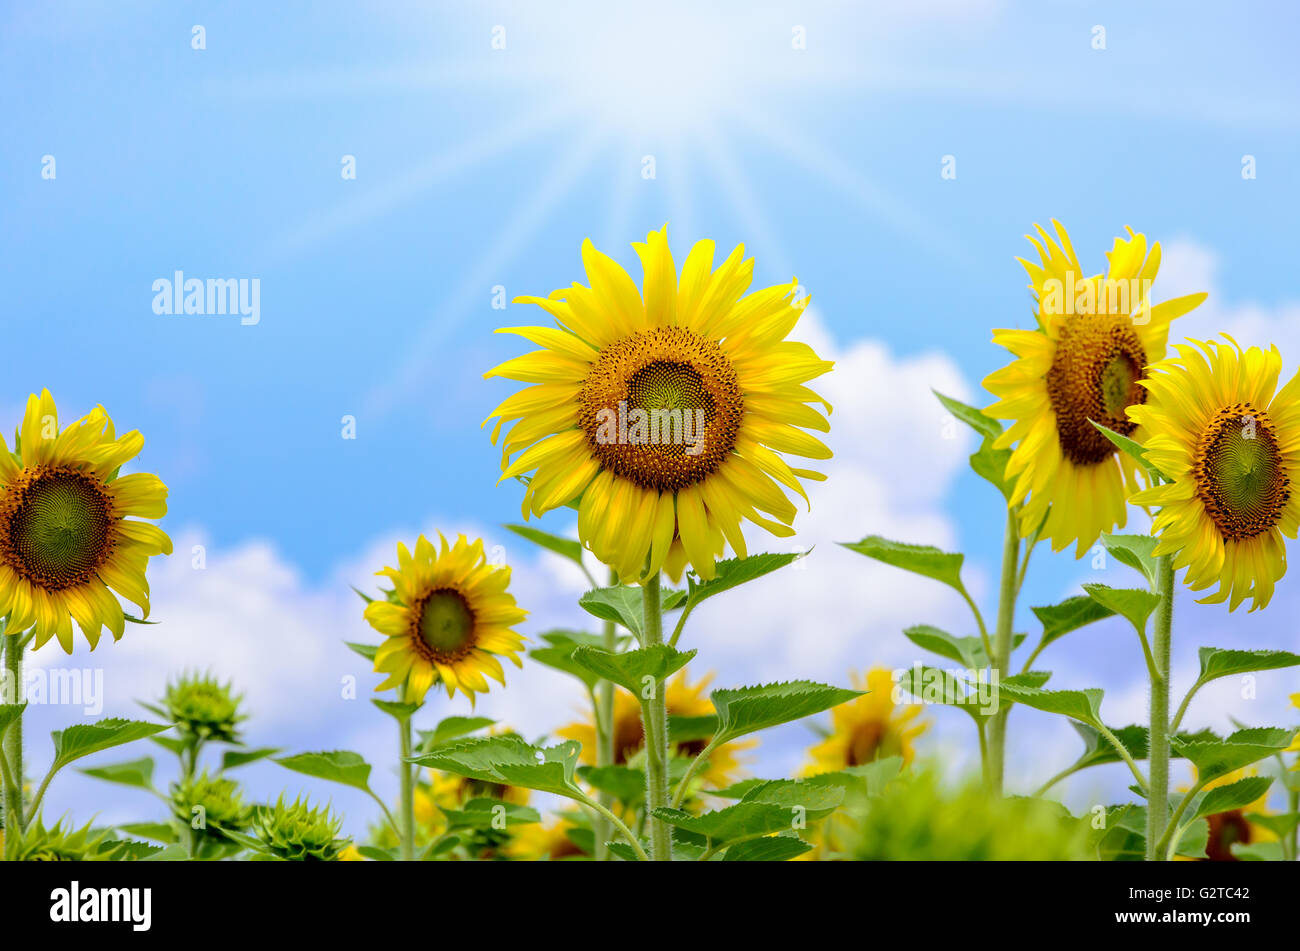 Many yellow flower of the Sunflower or Helianthus Annuus blooming under sunlight and the sun shines in the field on blue sky bac Stock Photo